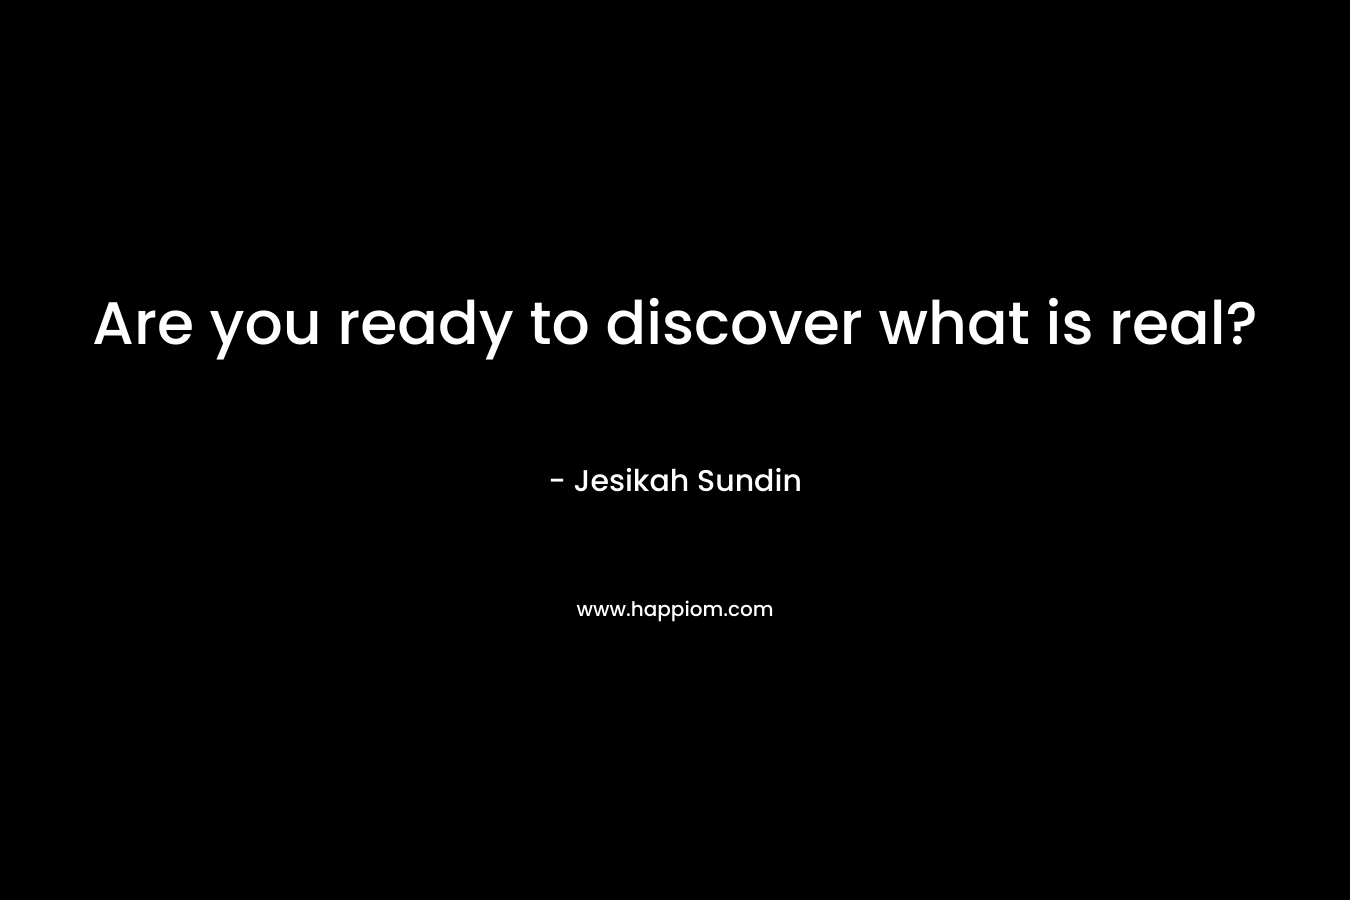 Are you ready to discover what is real?